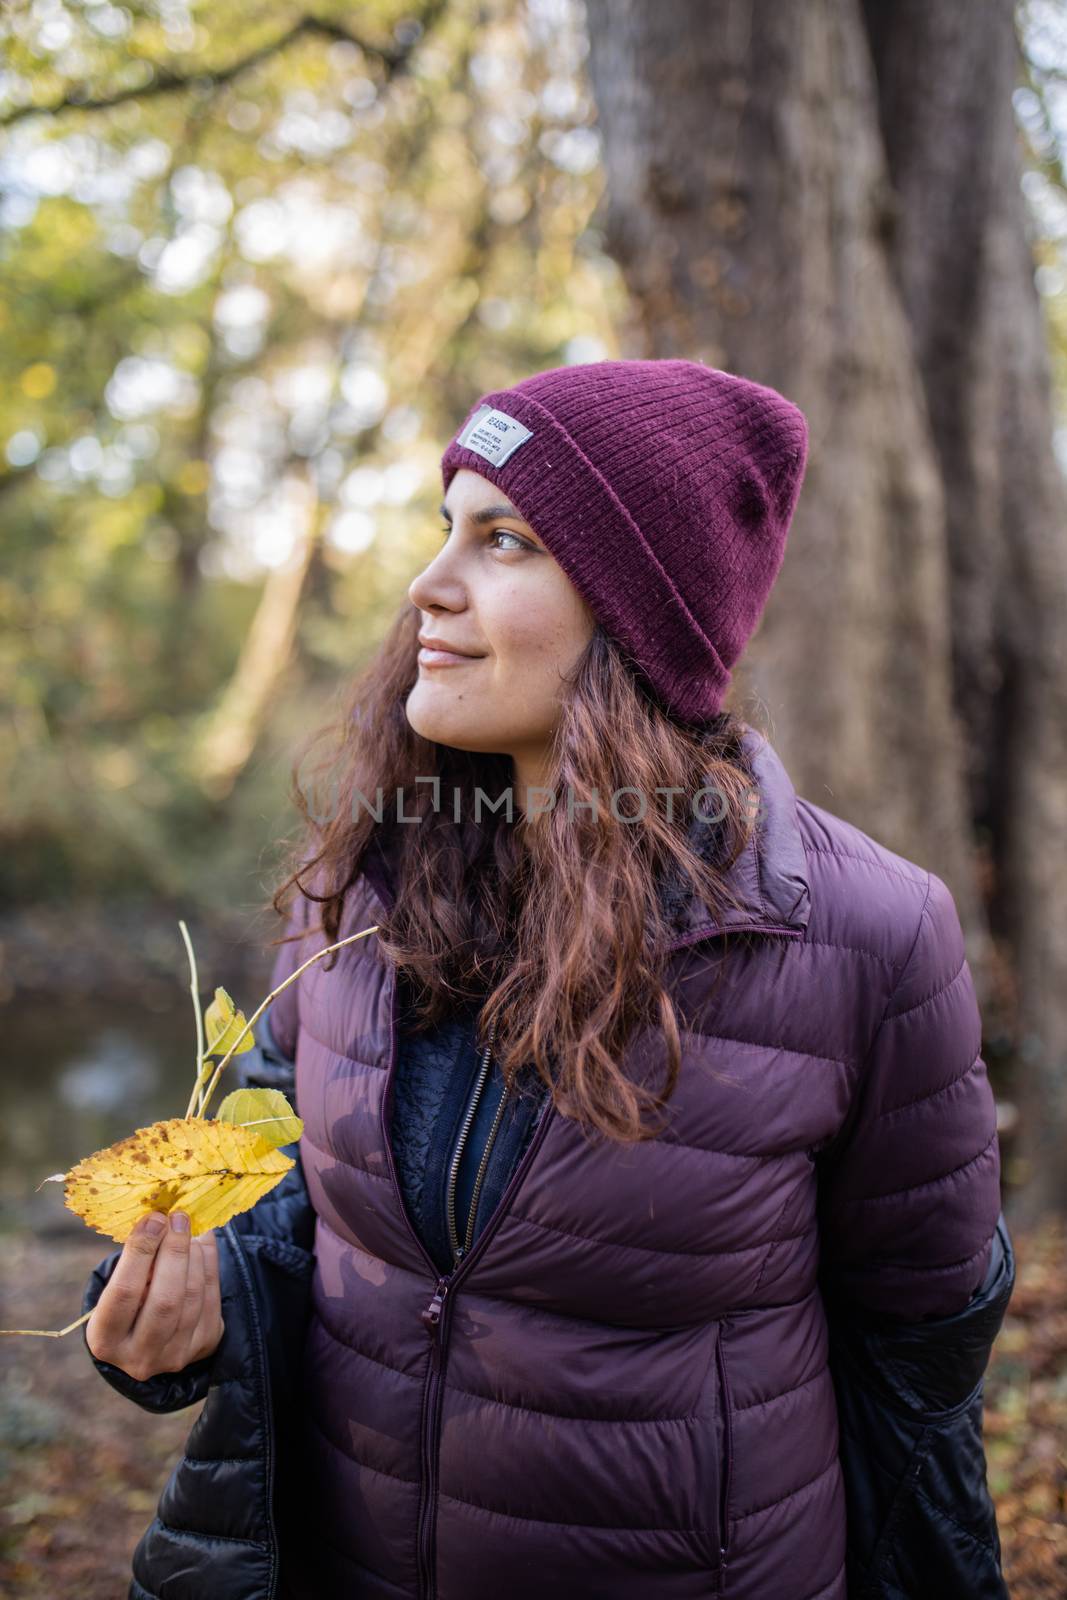 Smiling brunette woman holding a yellow leaf and looking away in the forest. Portrait of woman wearing knitted hat in forest. Adventurous day in nature